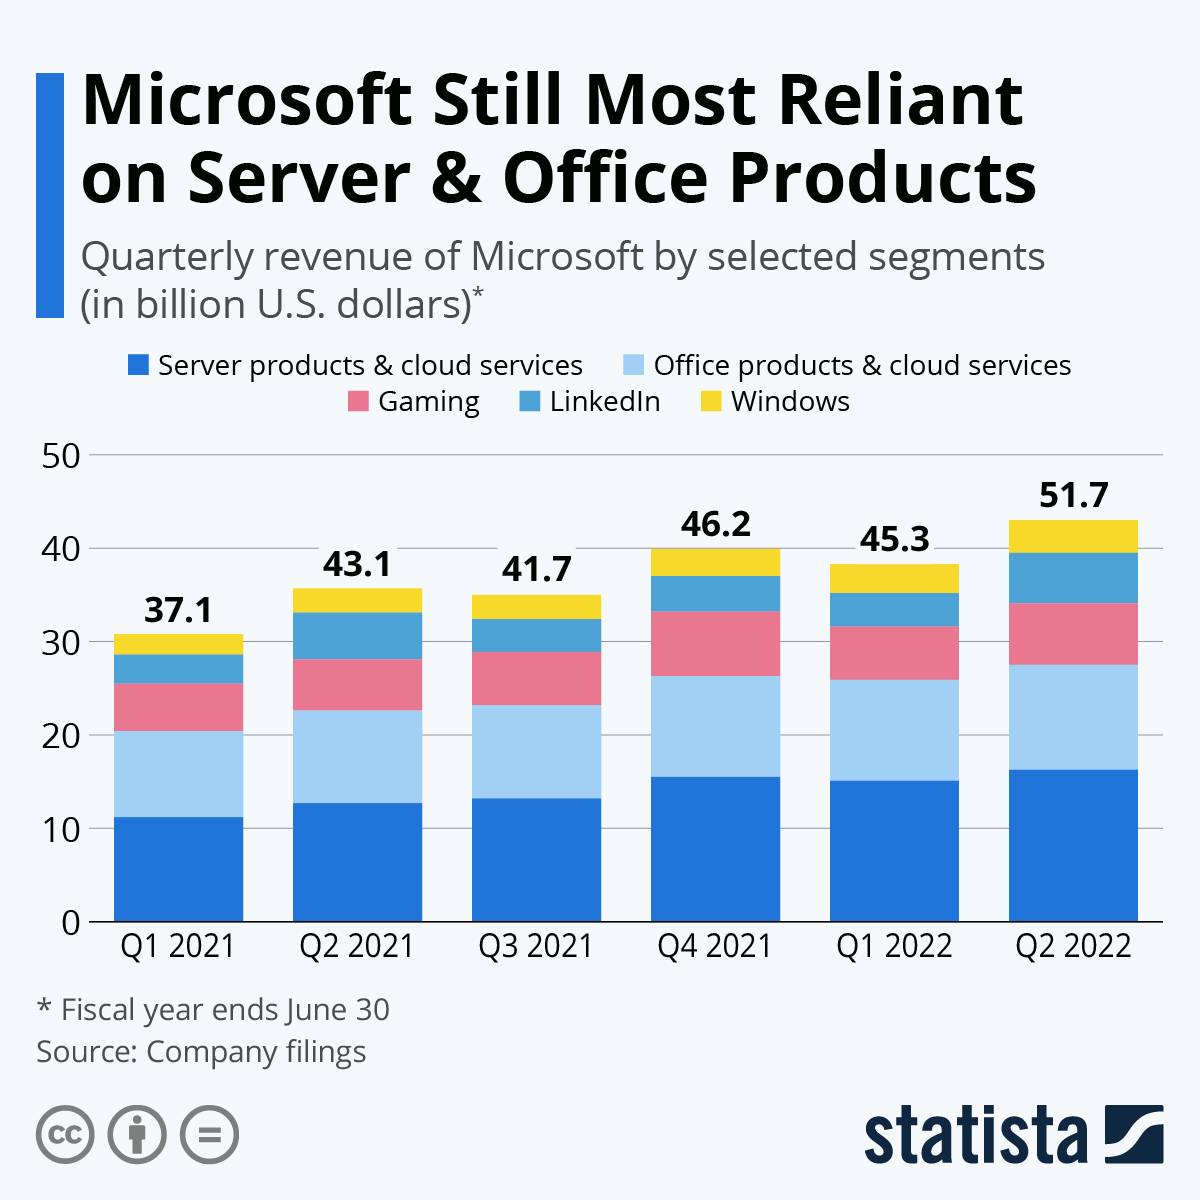 Microsoft Still Most Reliant on Server & Office Products
